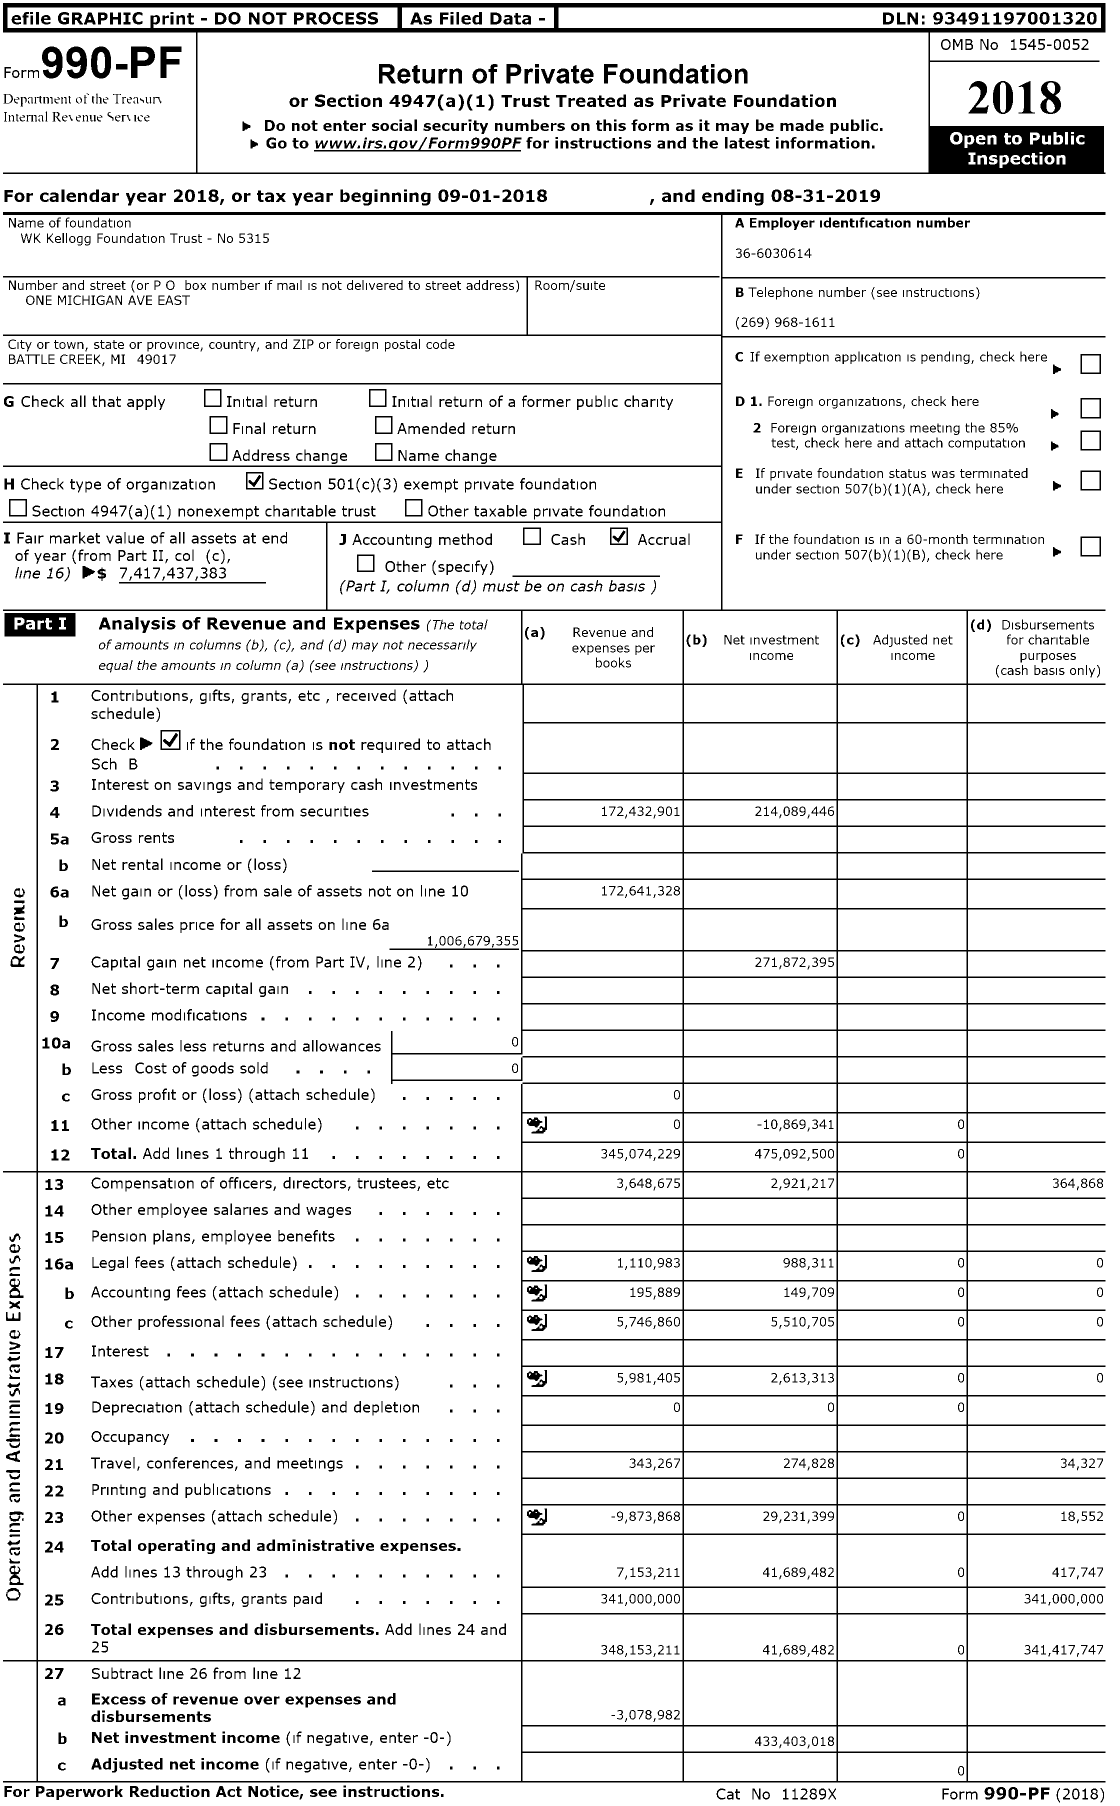 Image of first page of 2018 Form 990PR for W. K. Kellogg Foundation Trust